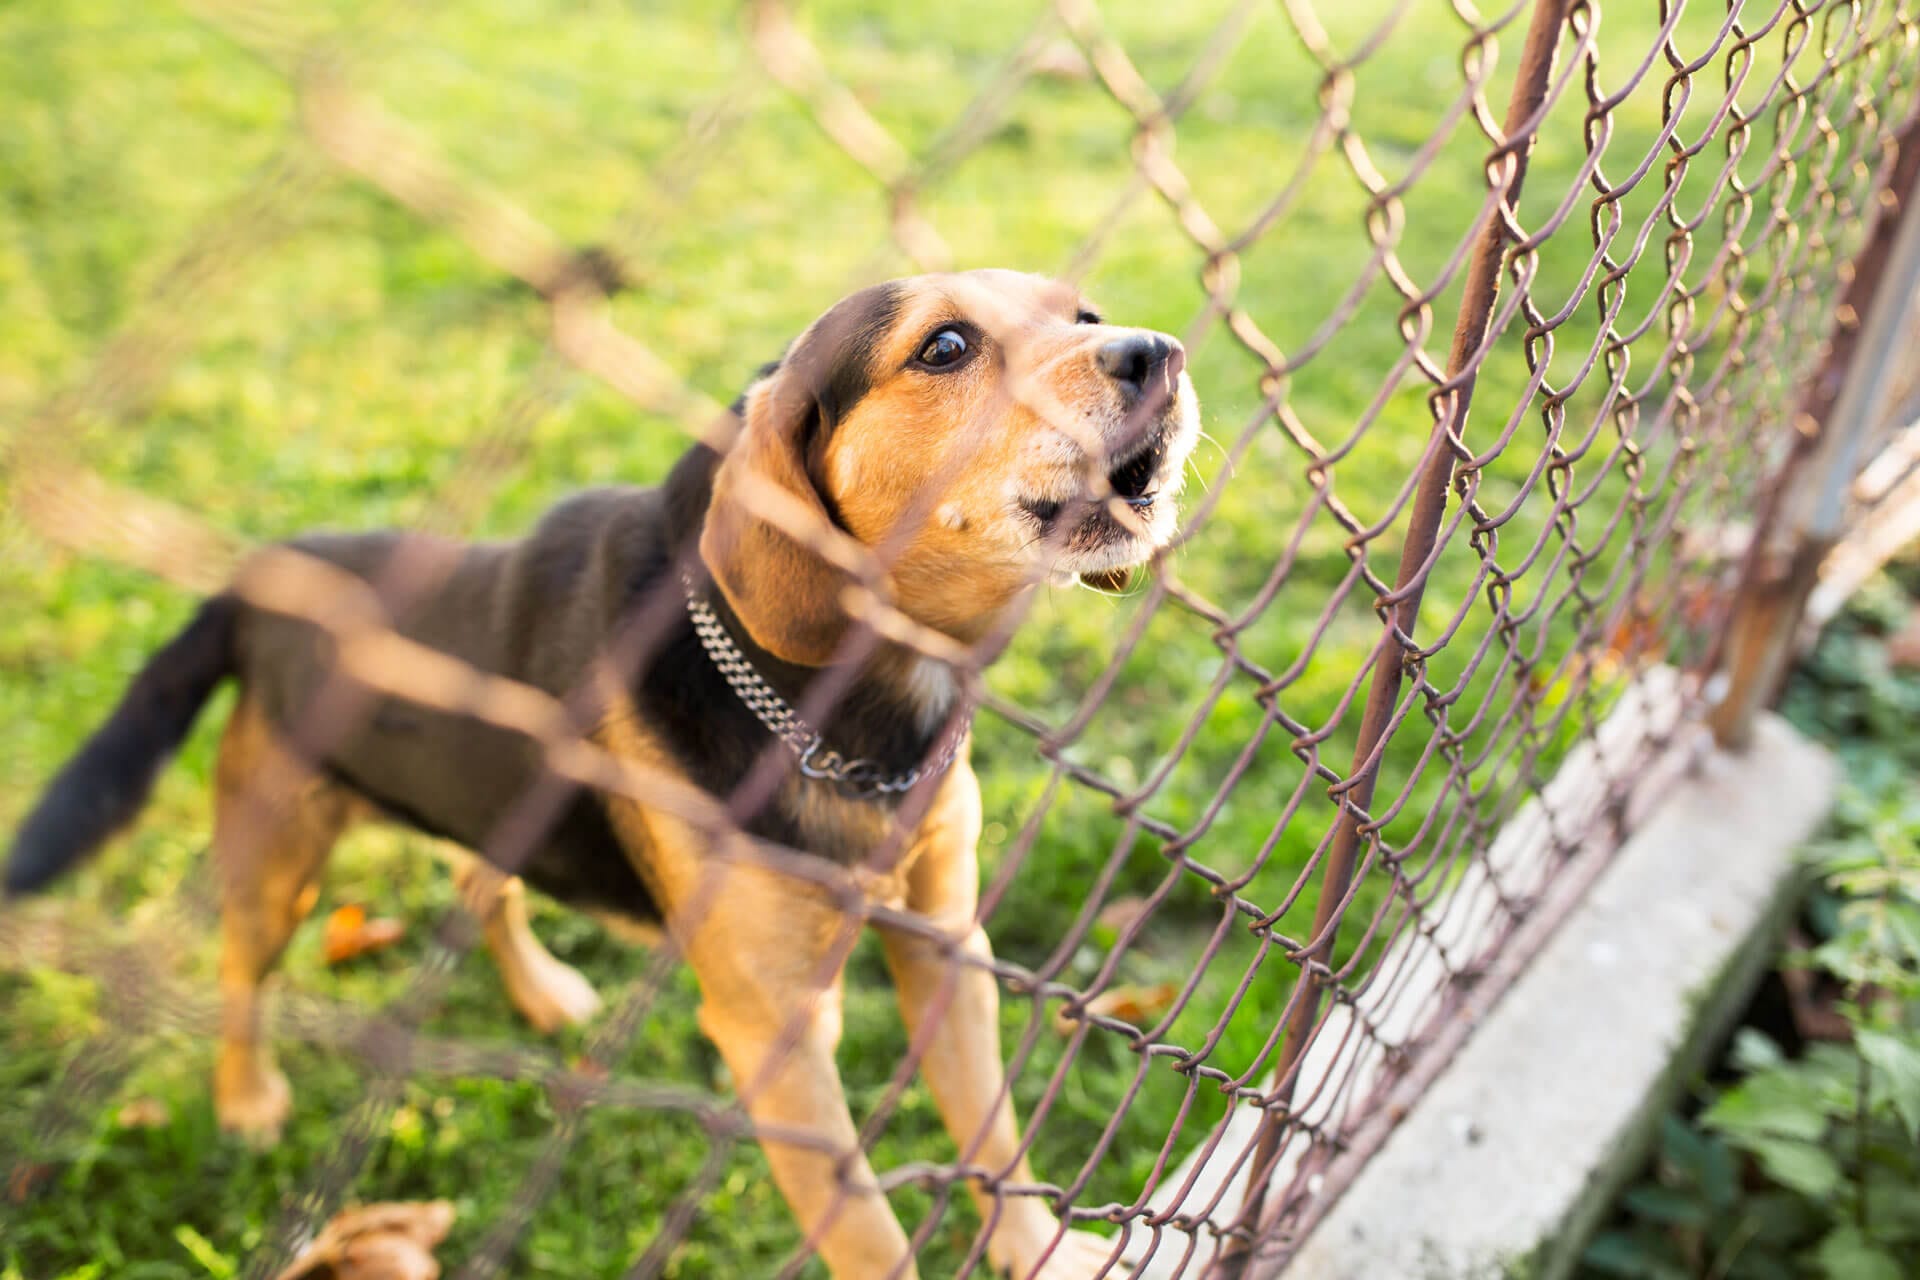 Can You Have a Dog Without a Fence?